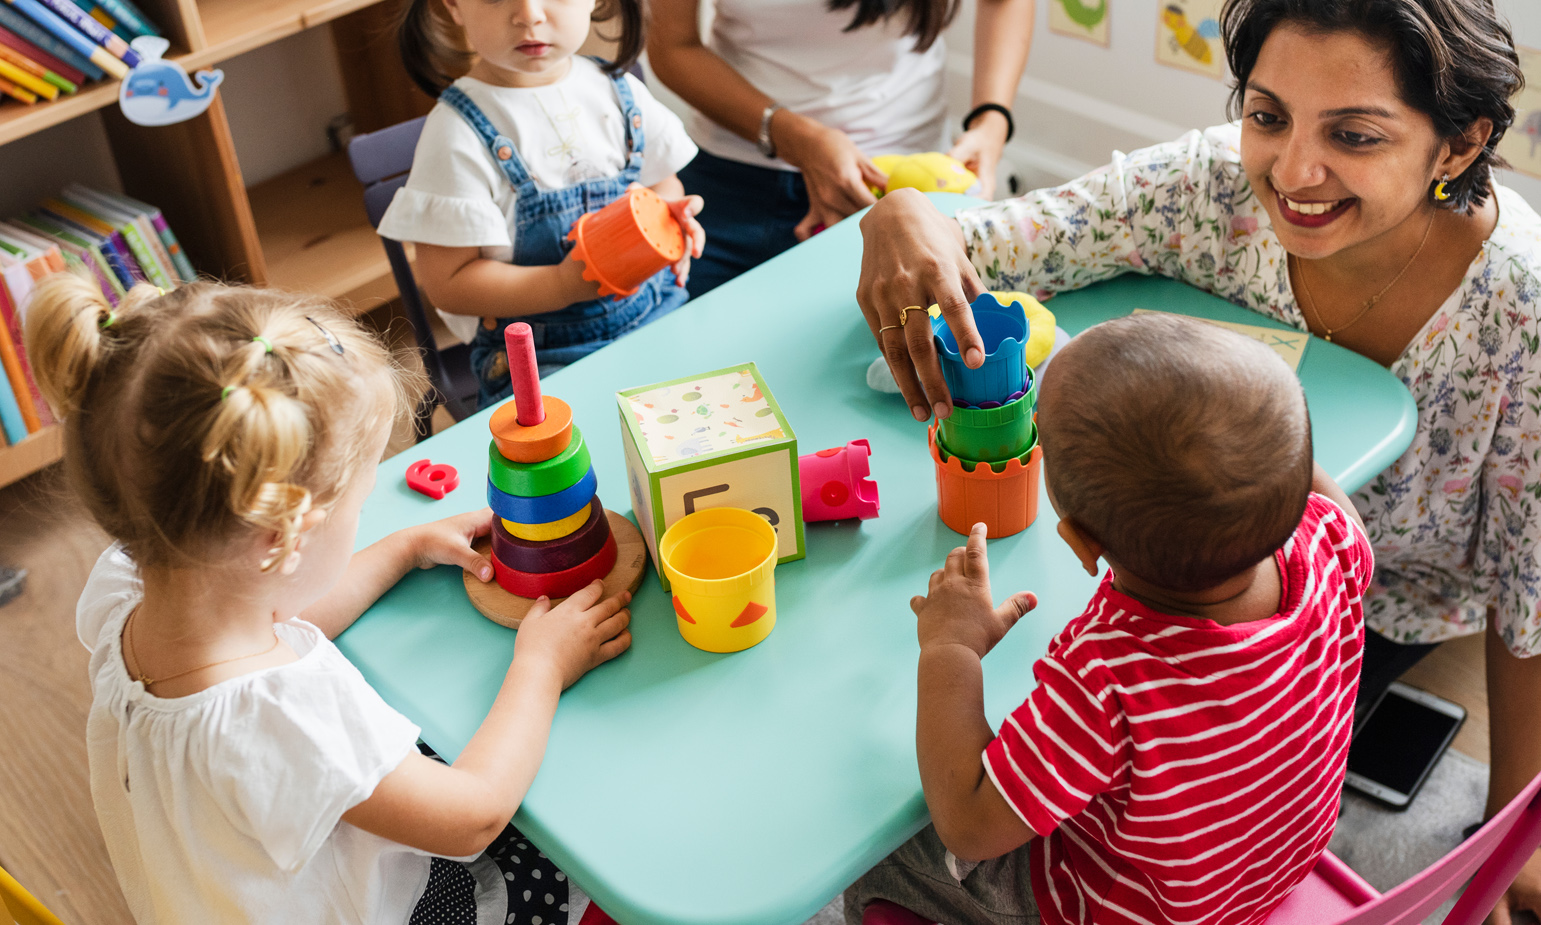 5 Key Factors to Consider When Seeking Child Care